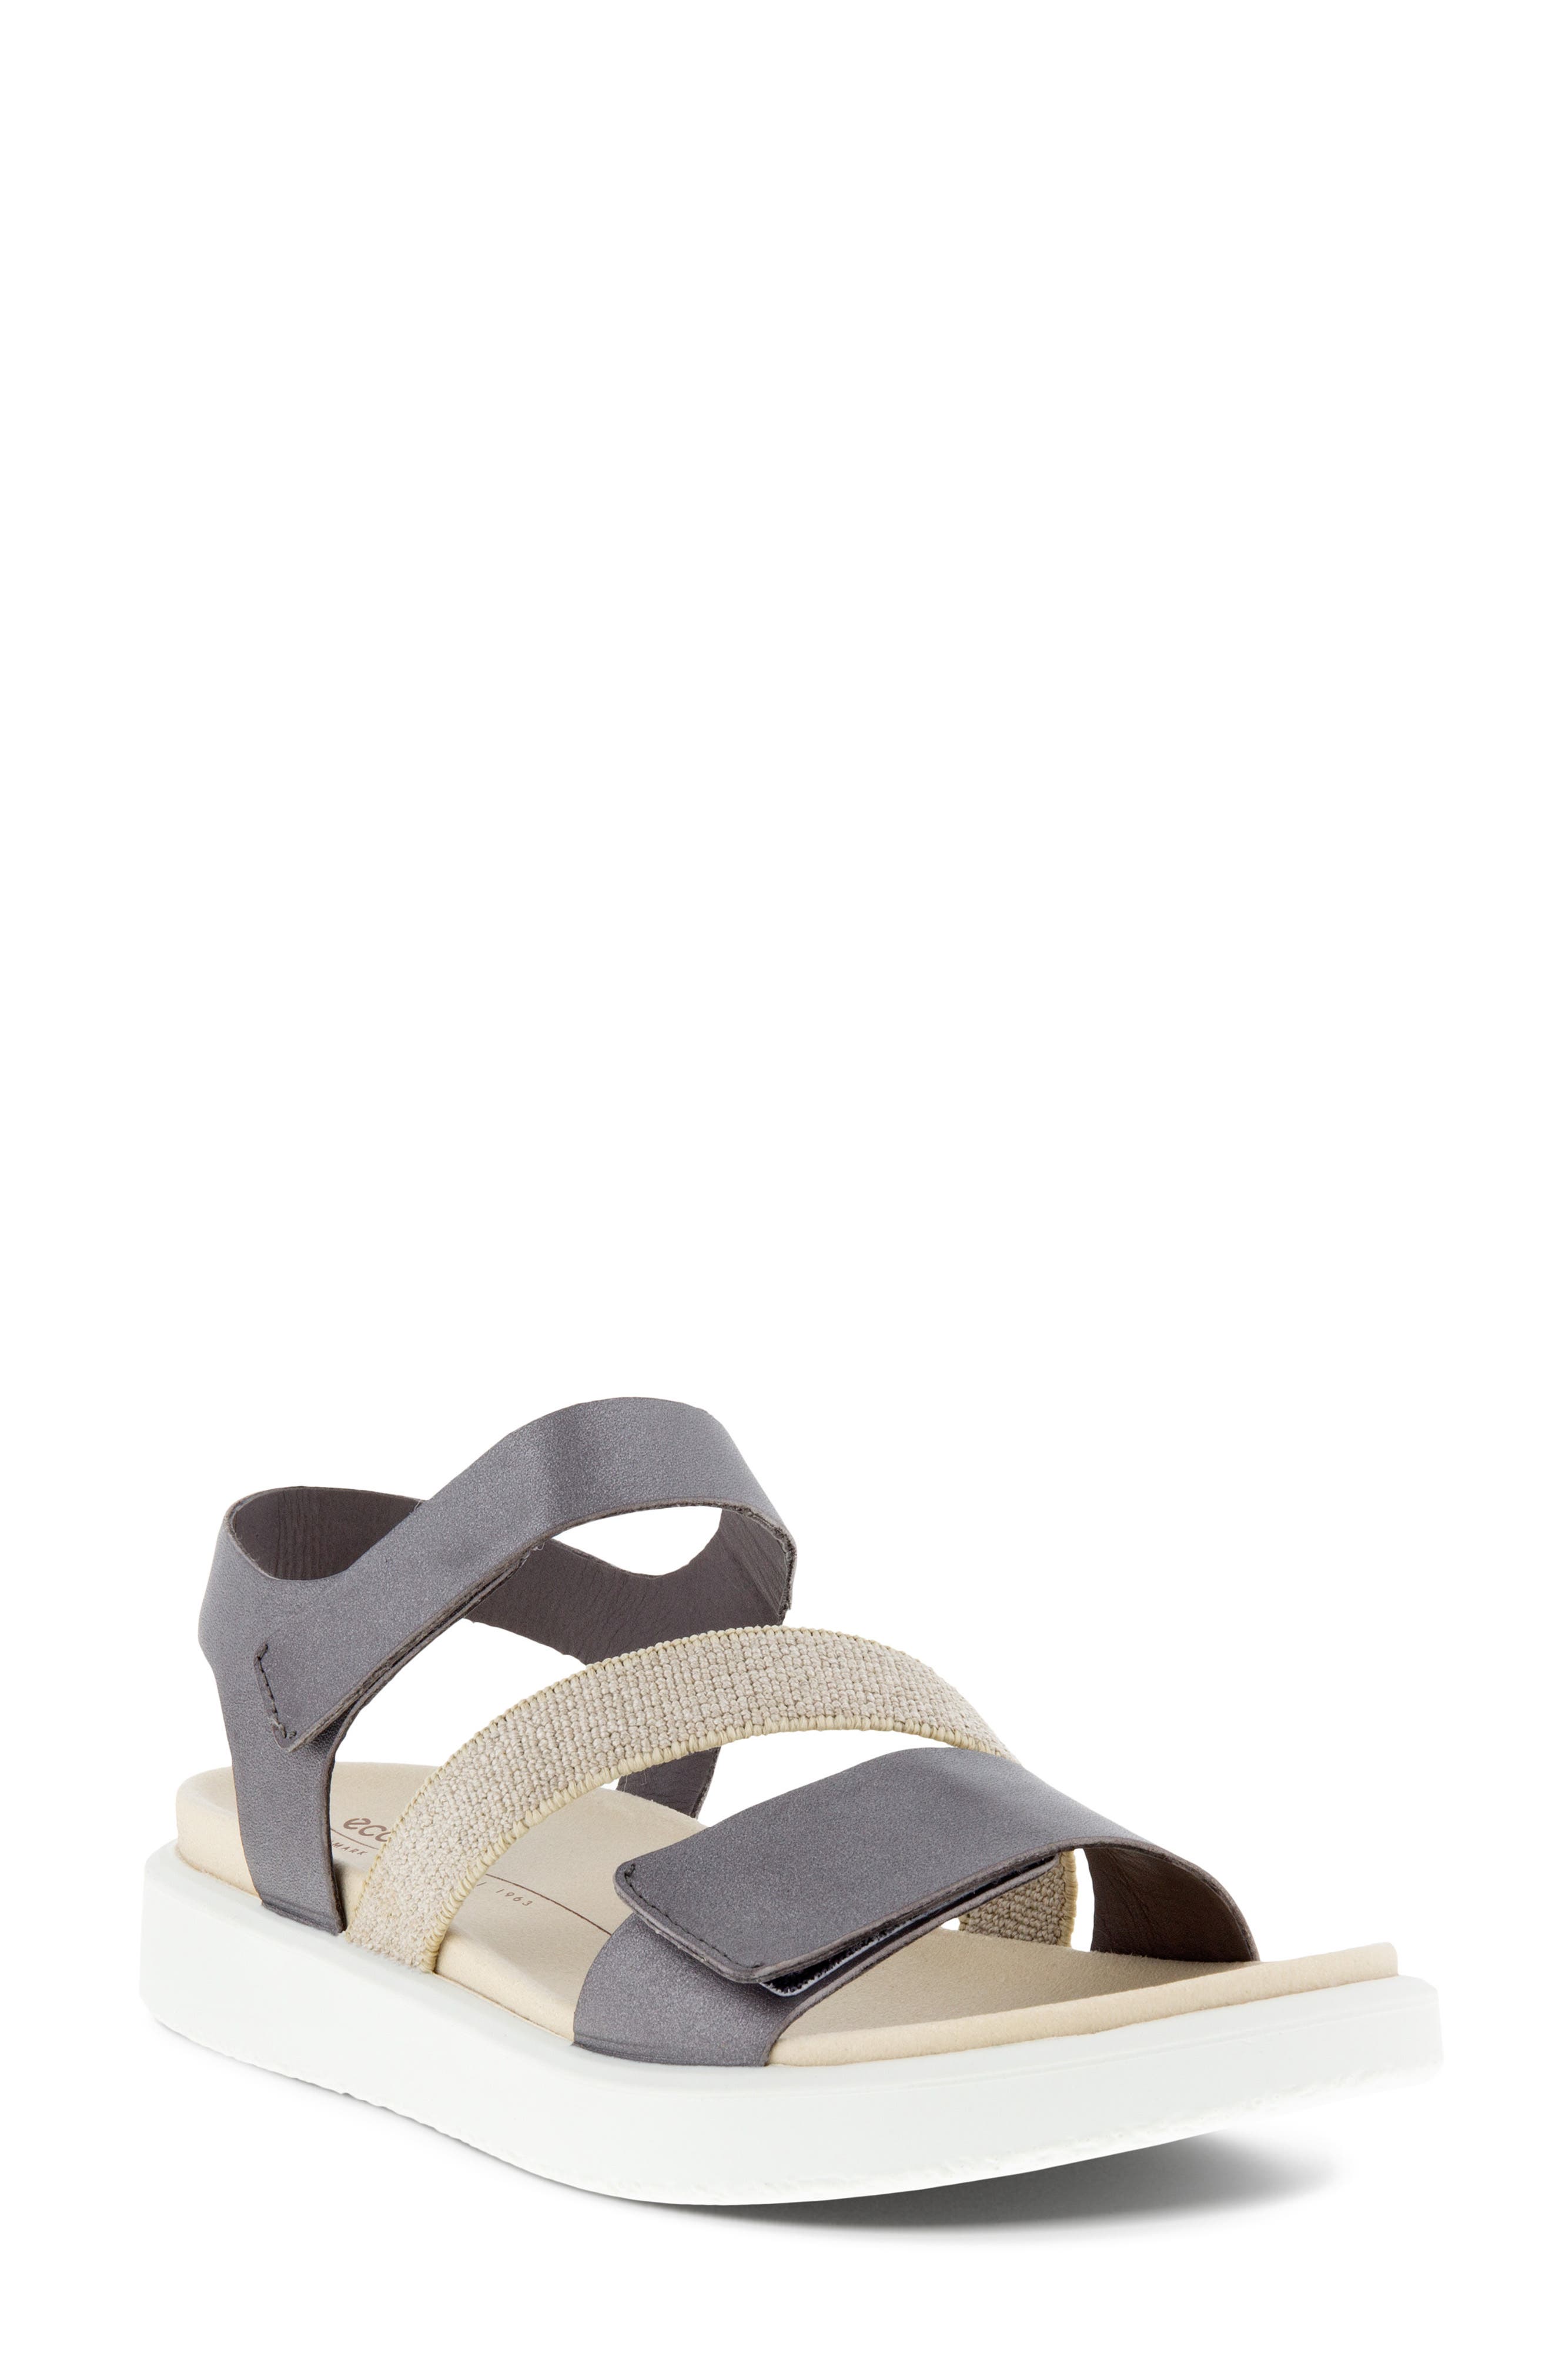 ecco womens sandals on sale